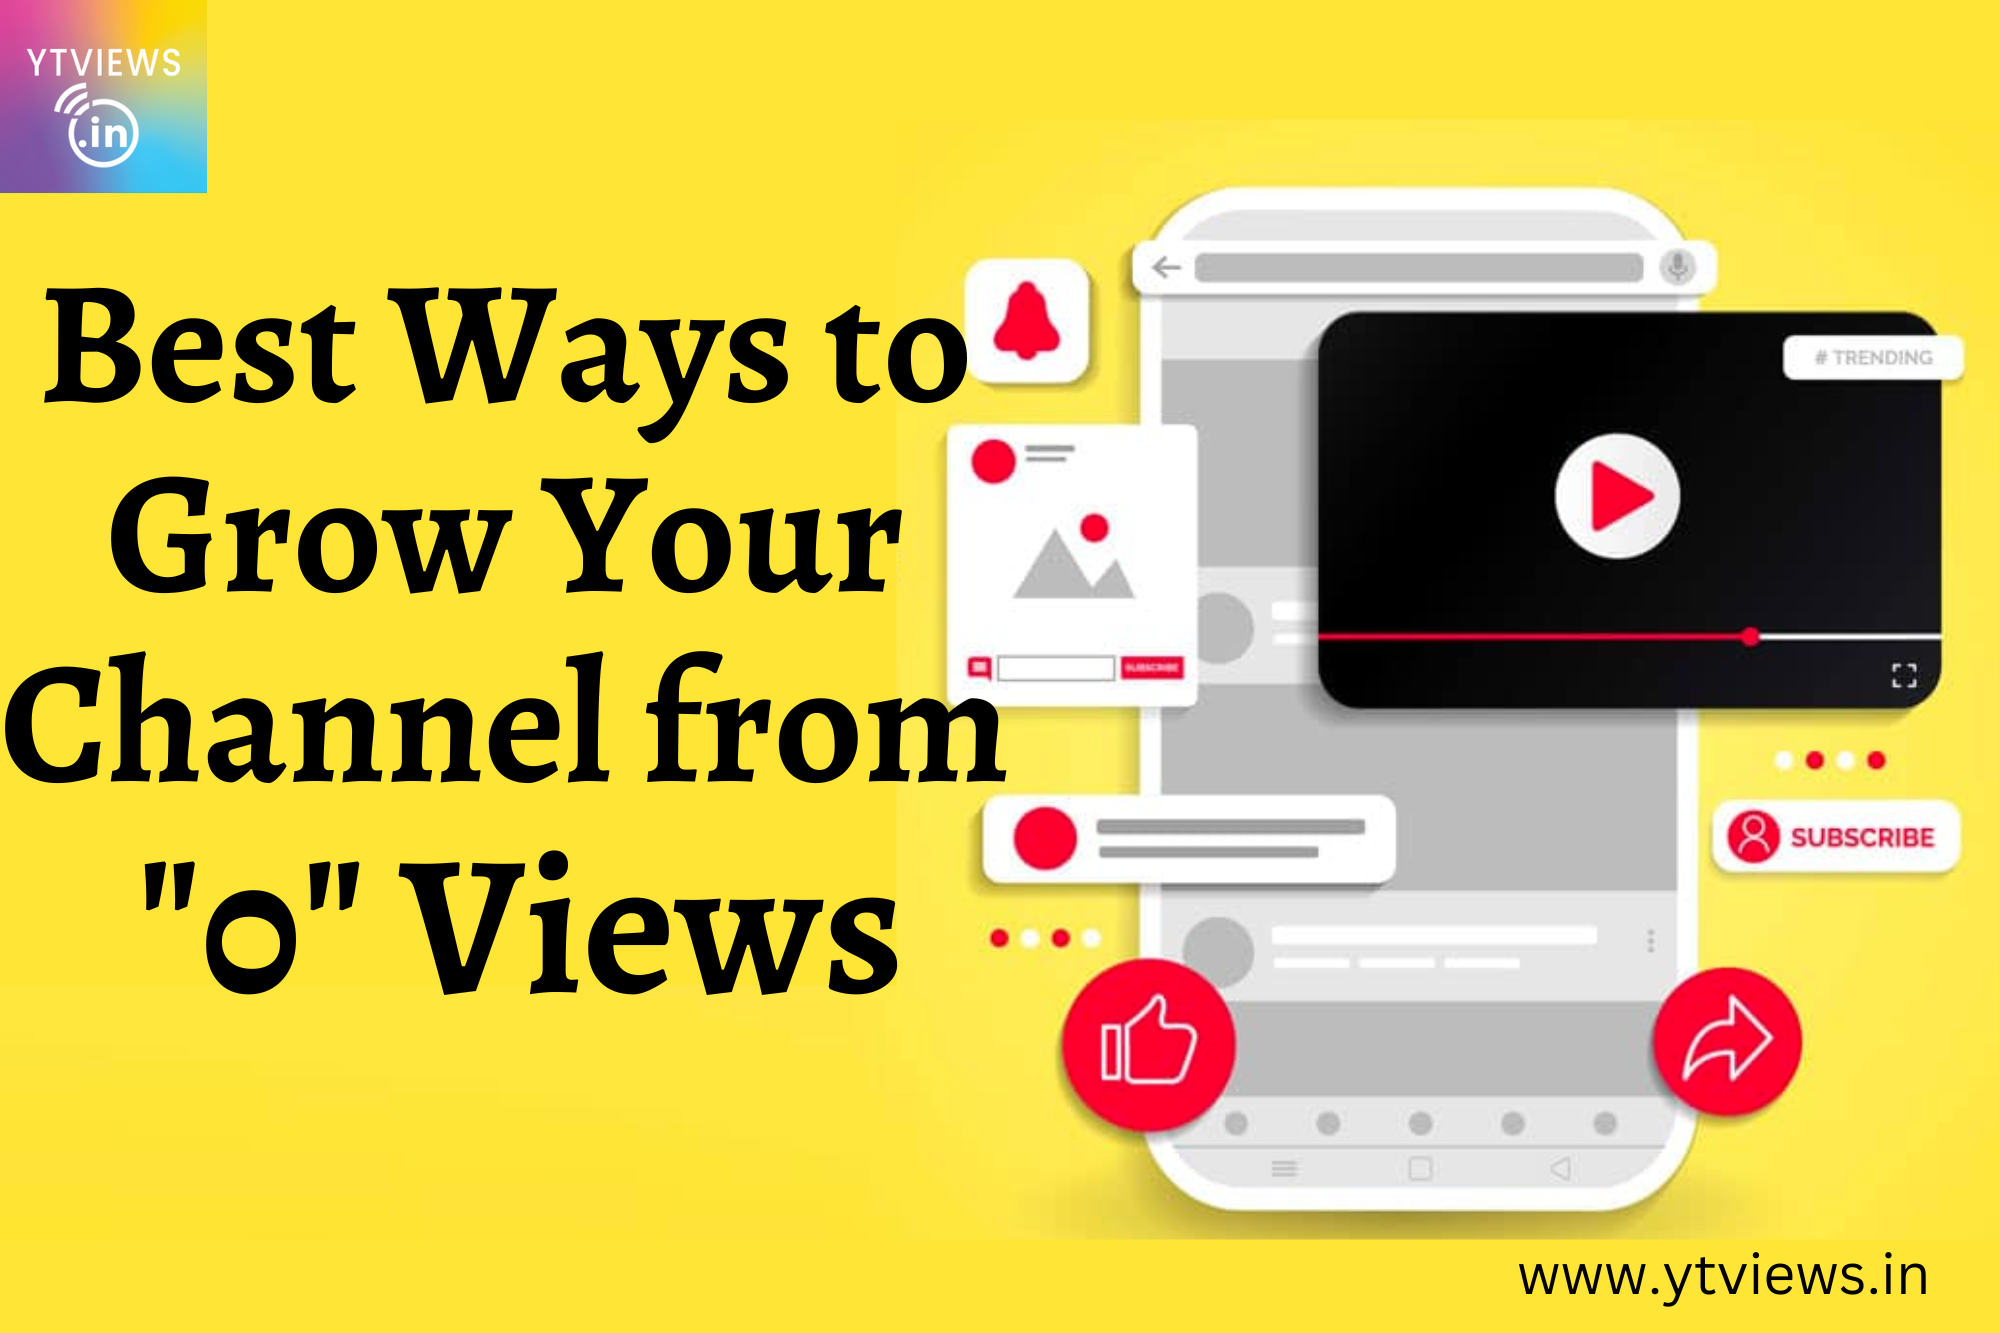 Best ways to grow your channel from 0 views